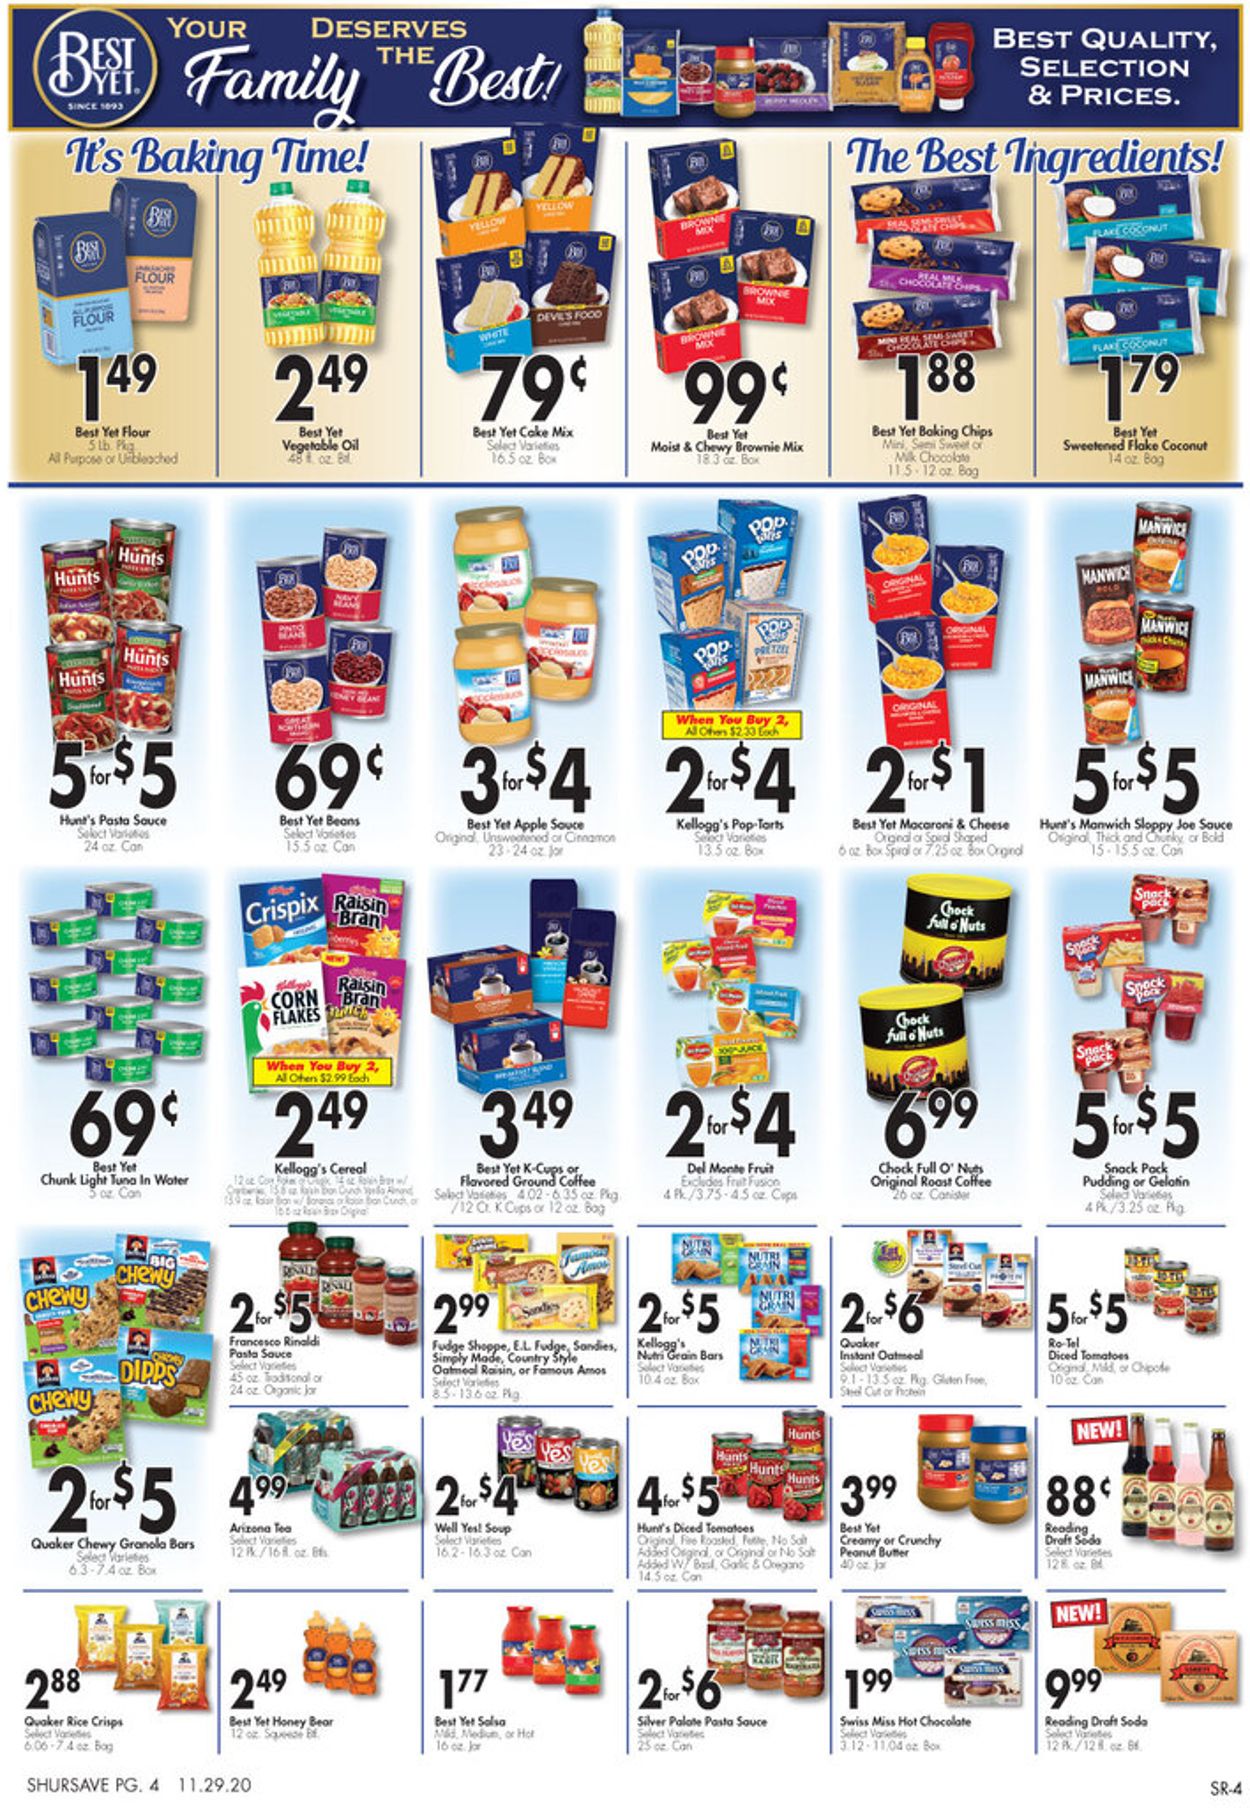 Catalogue Gerrity's Supermarkets - Cyber Monday 2020 from 11/29/2020